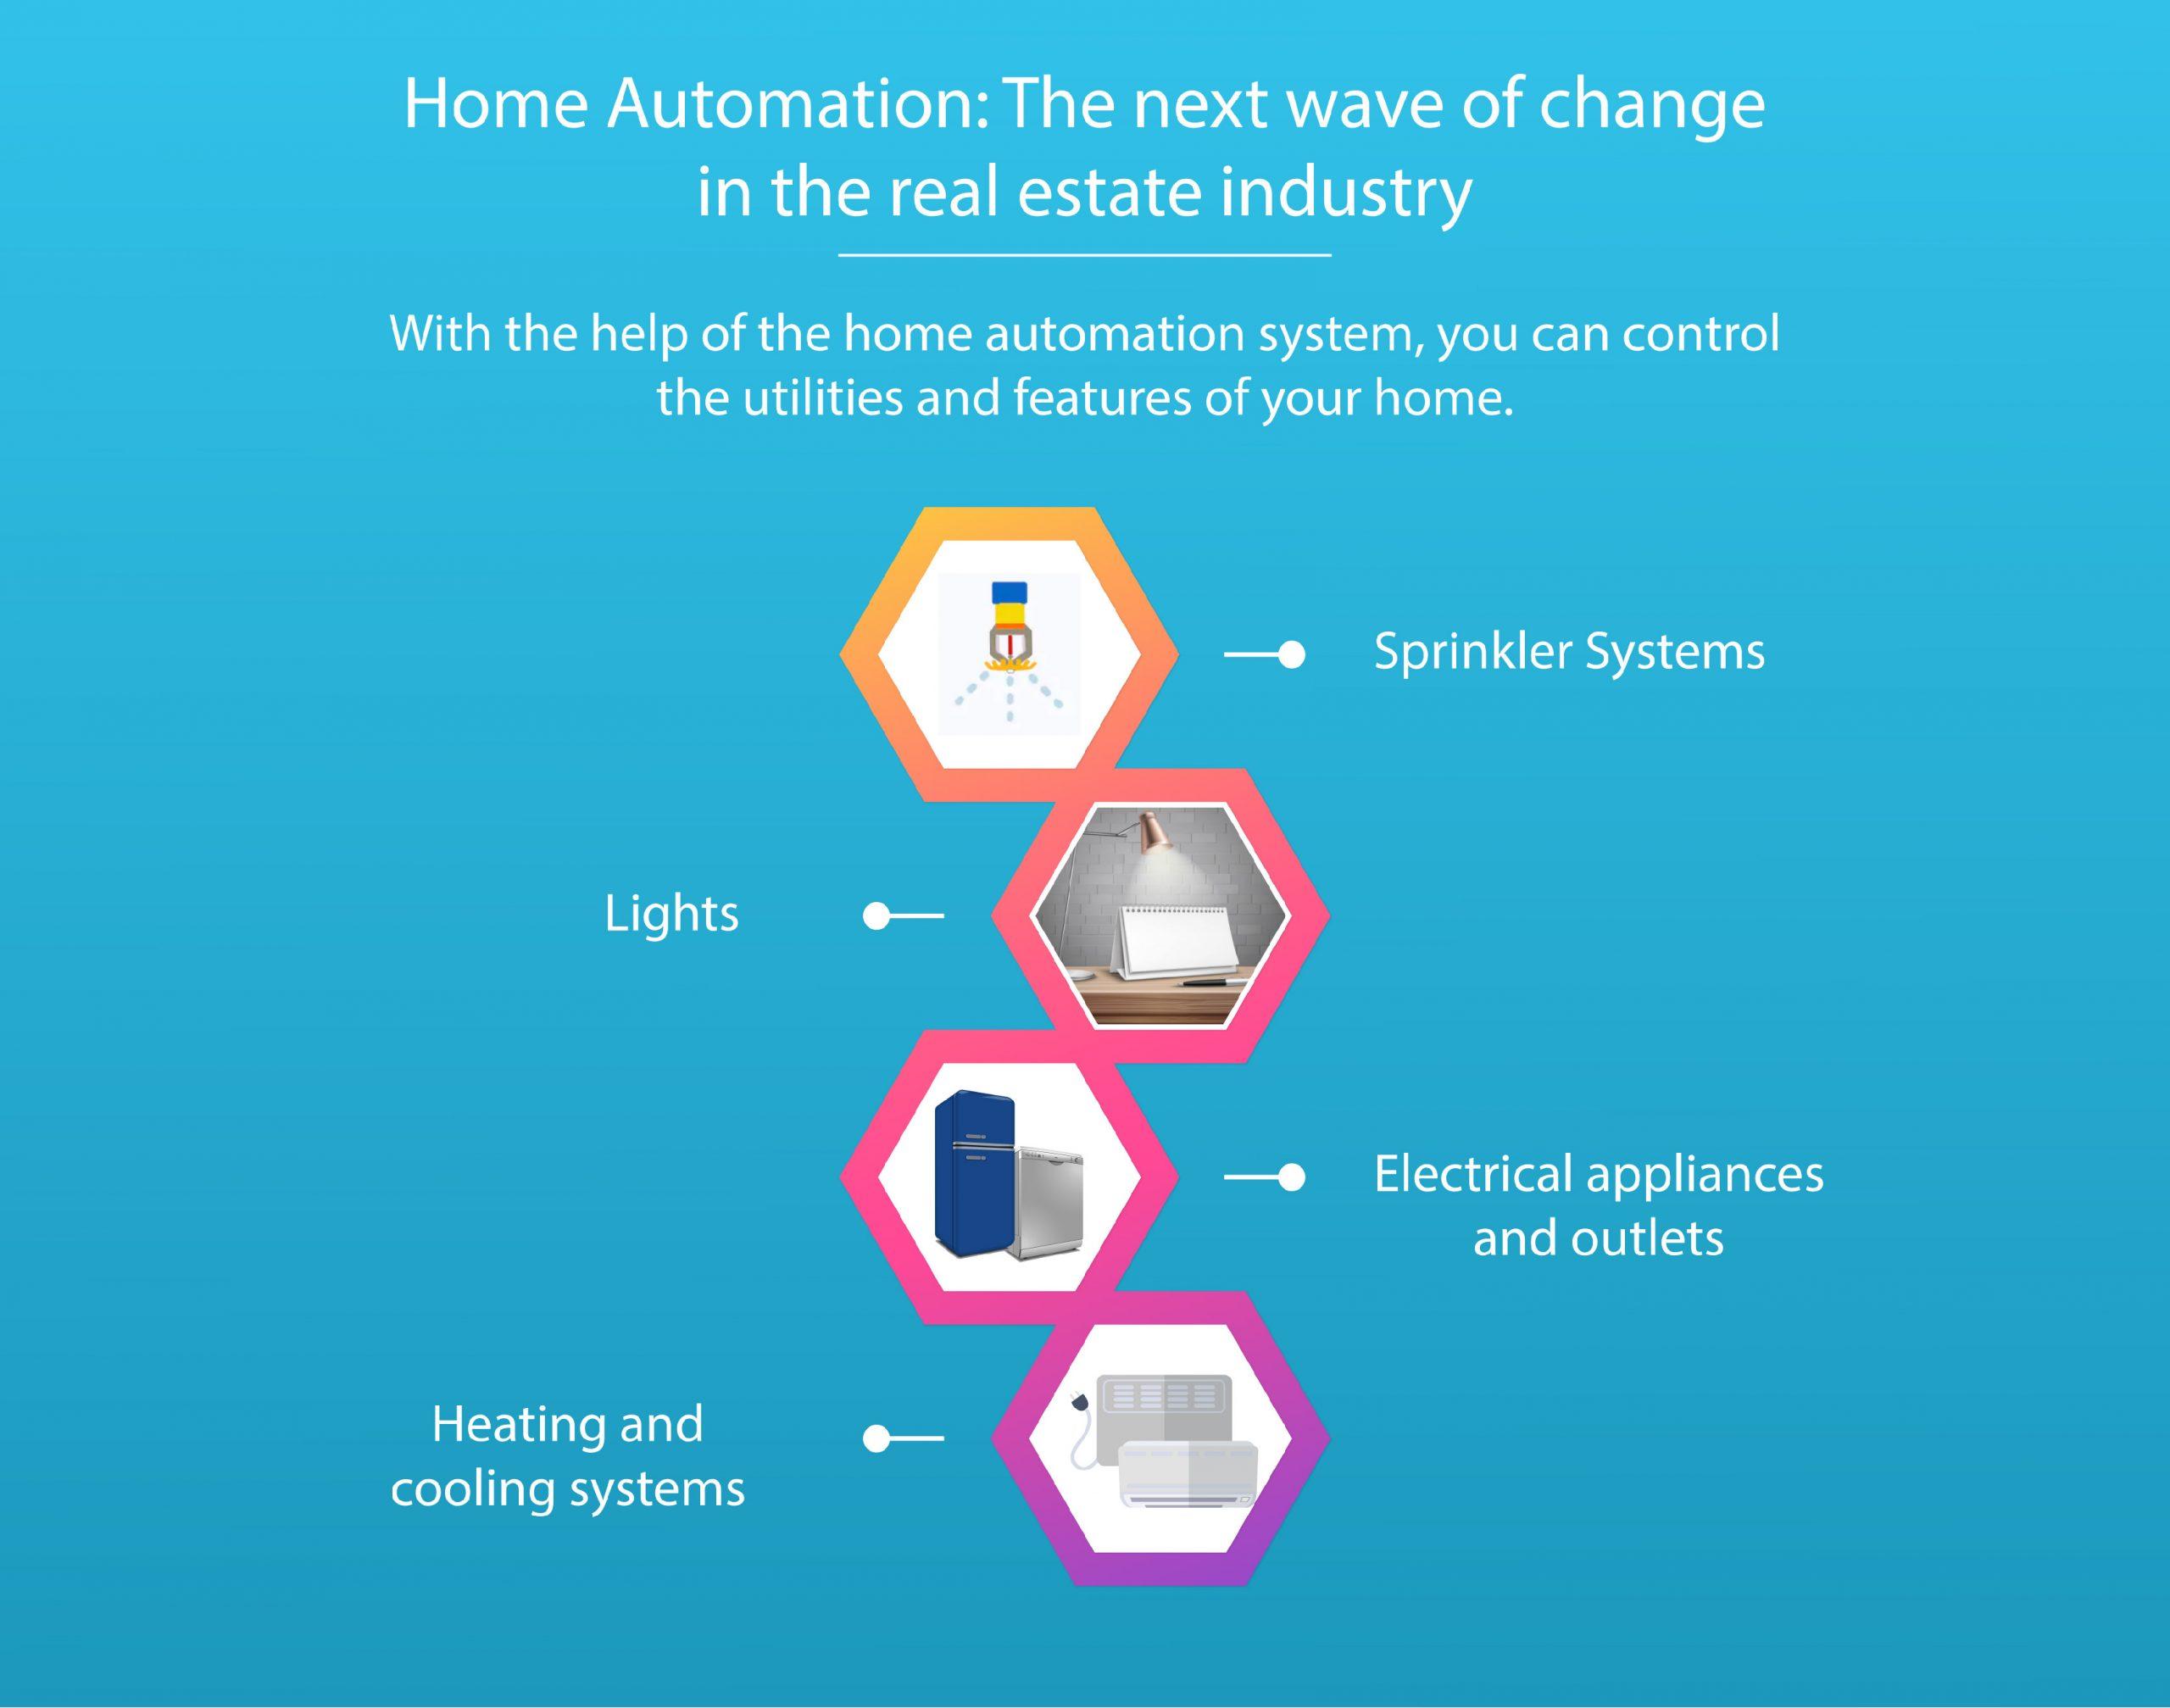 Home Automation: The next wave of change in the real estate industry